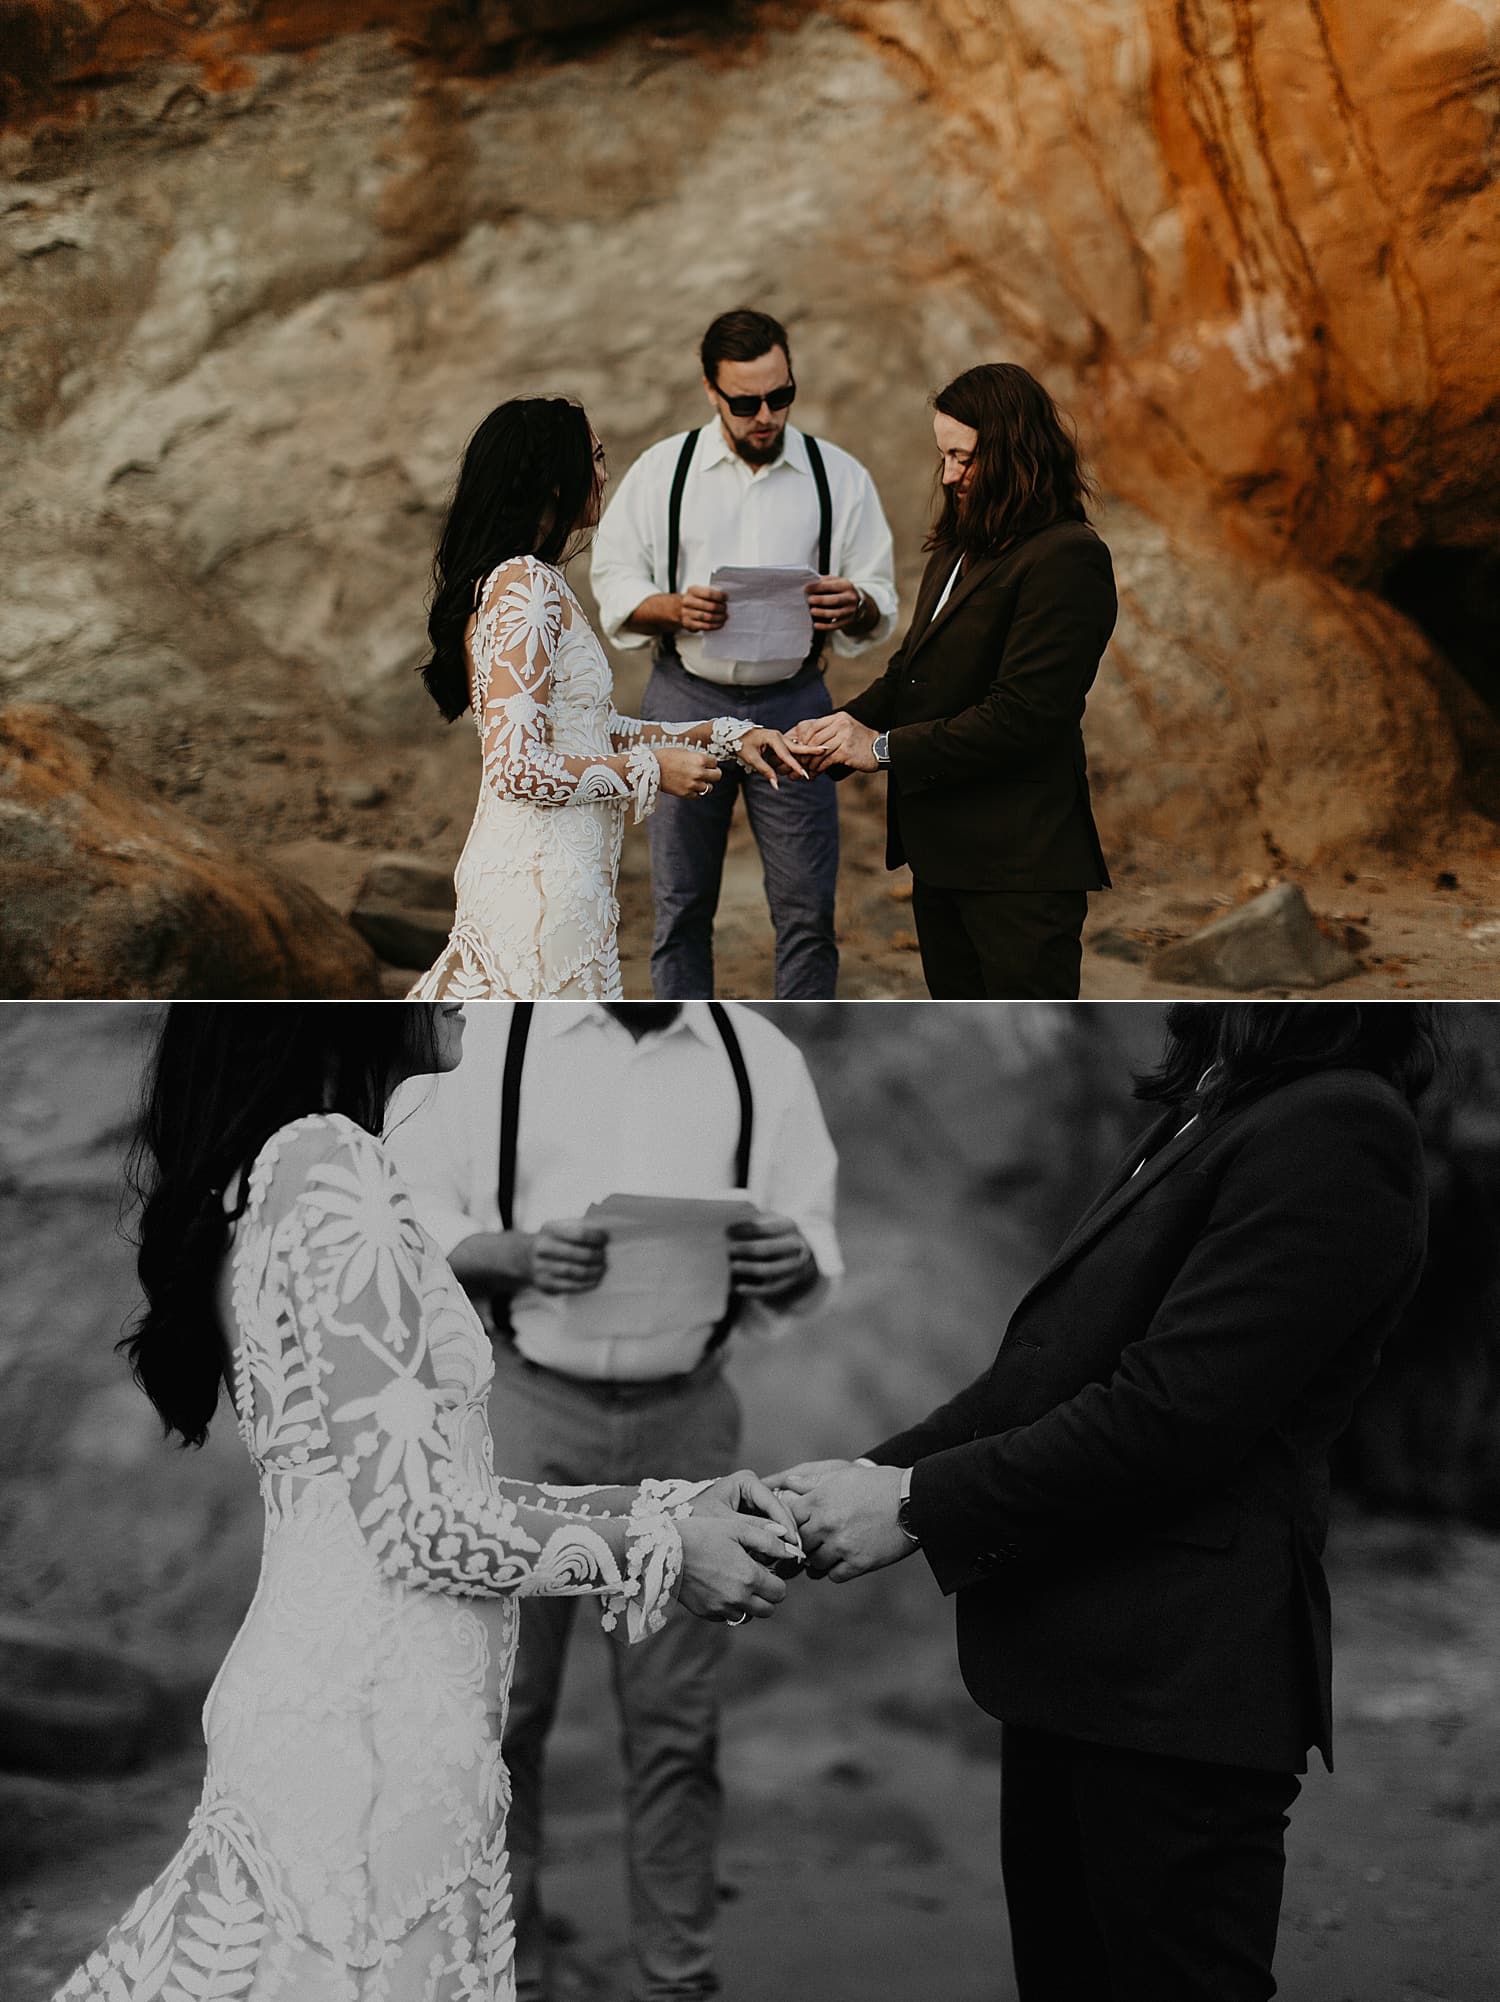 details of bride and groom holding hands for their wedding ceremony cape kiwanda elopement by marcela pulido portland oregon wedding photography